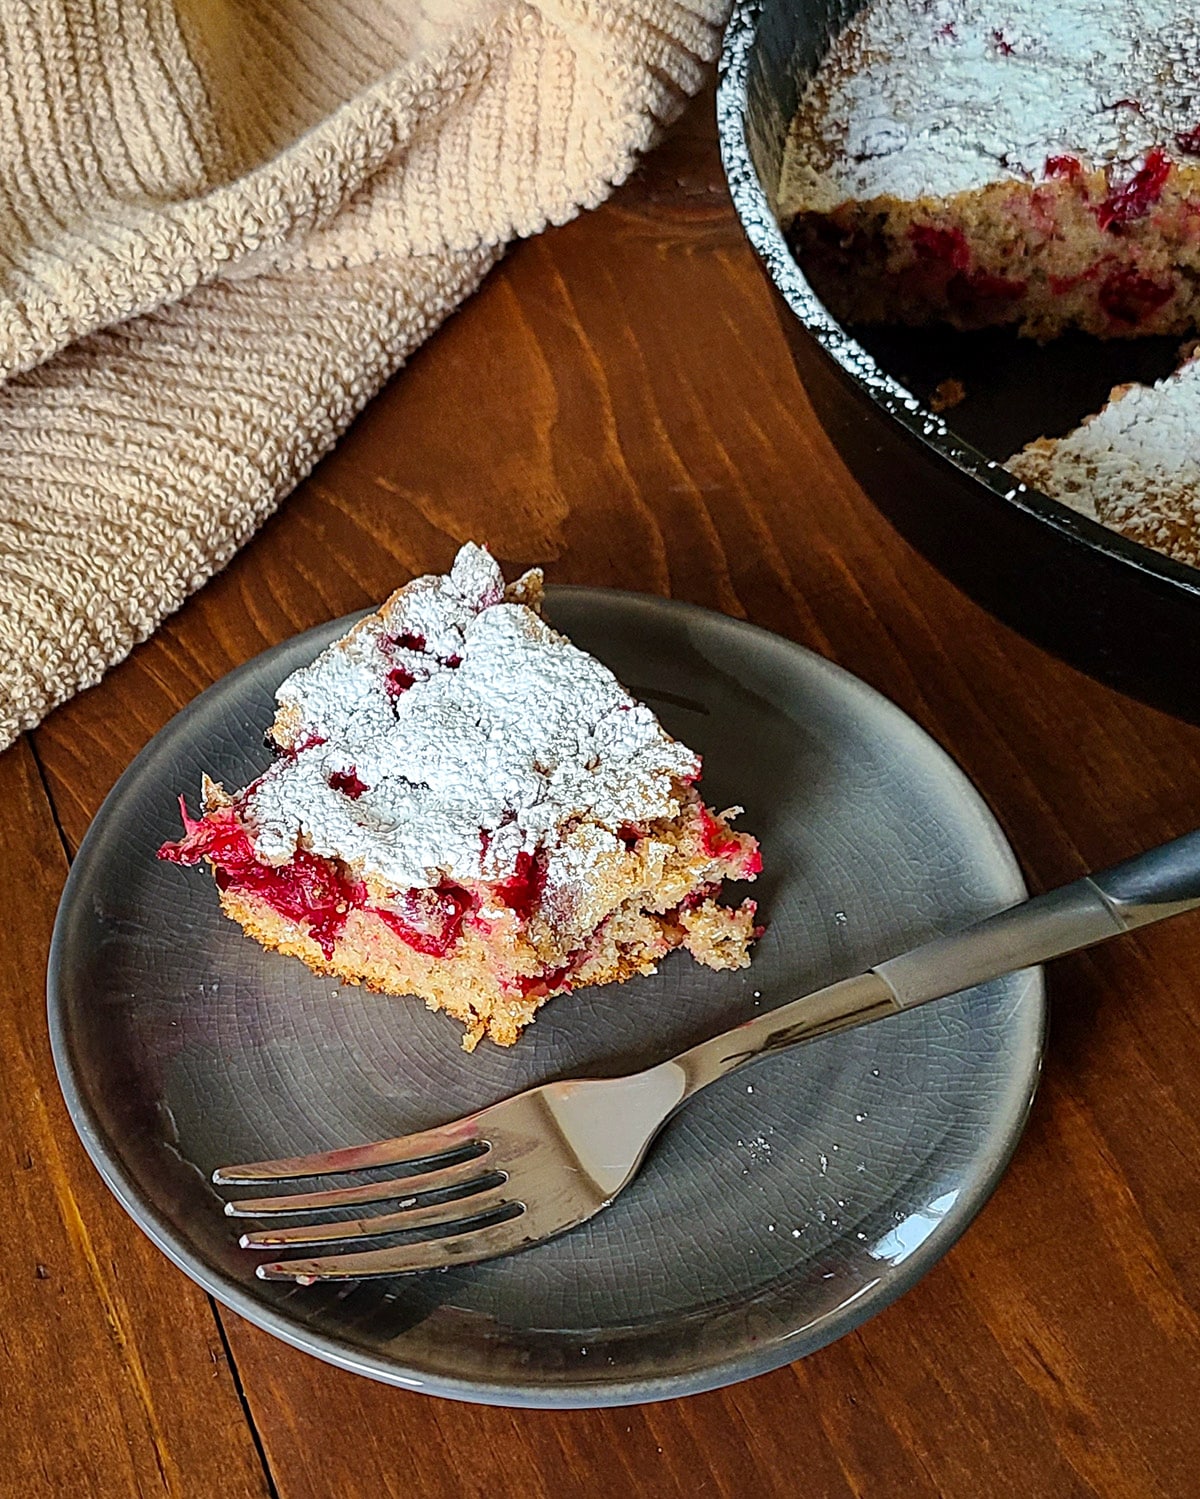 a half eaten piece of cranberry cake on a plate